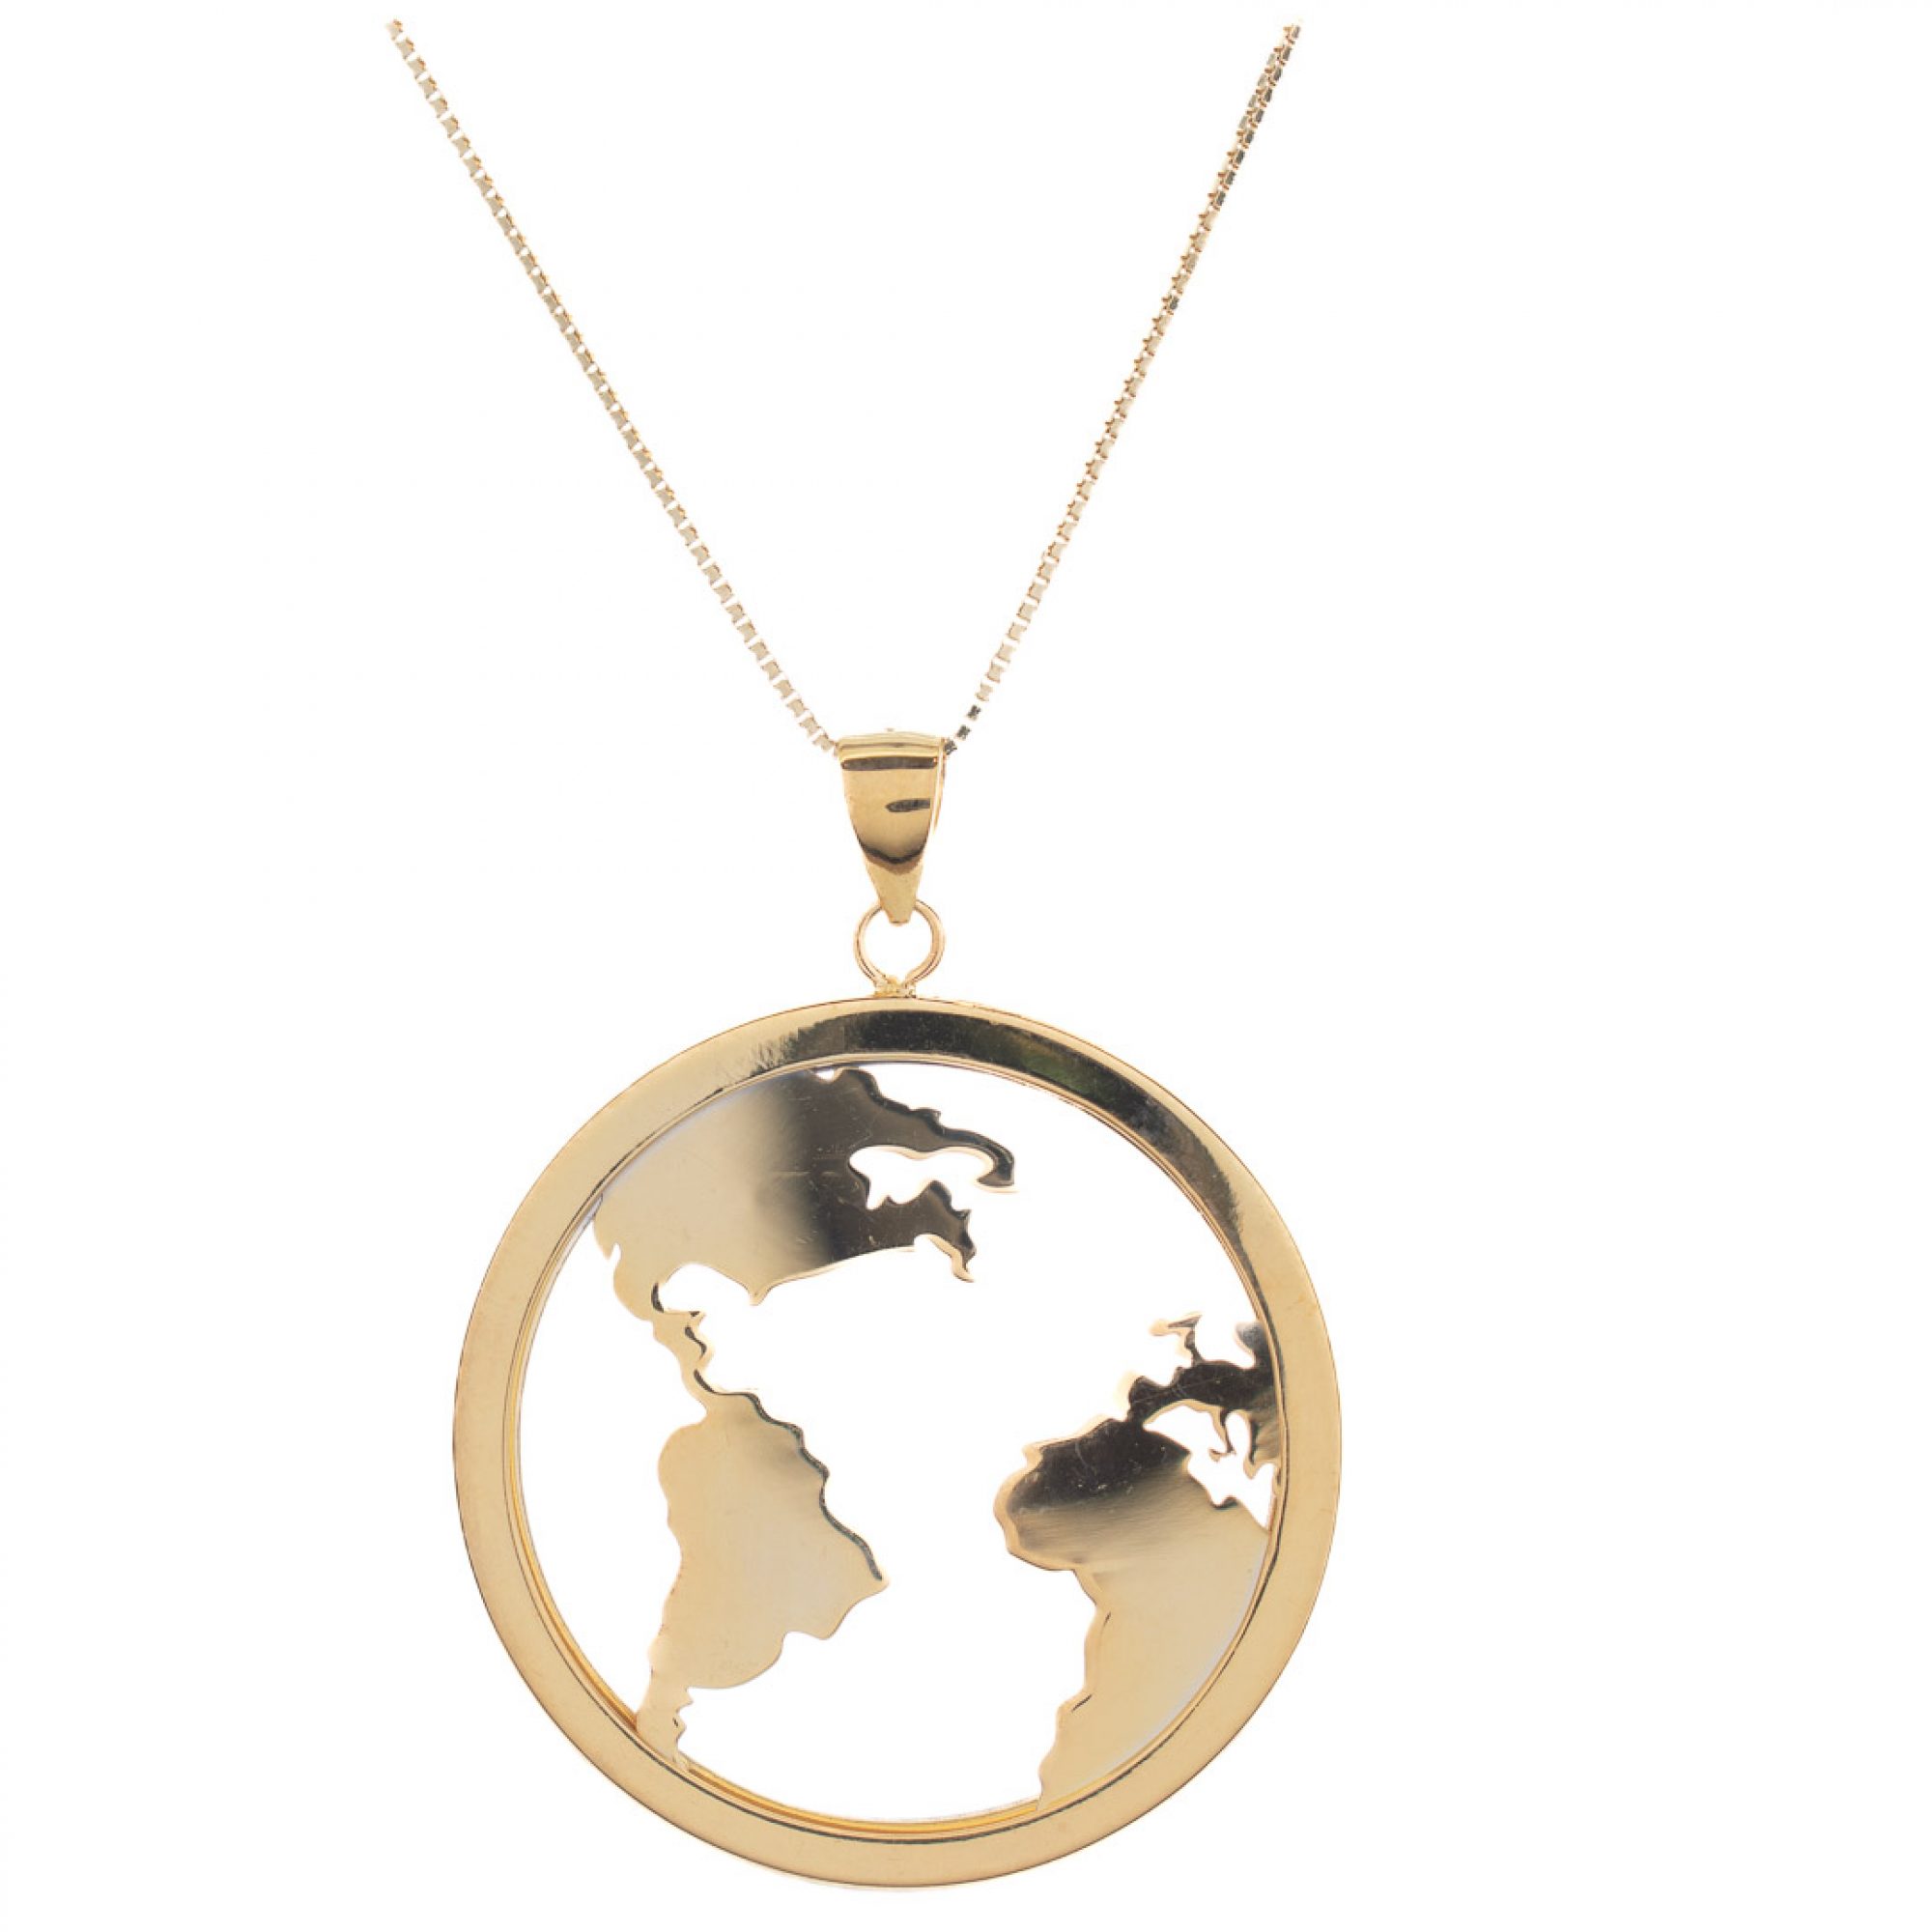 Gold plated globe necklace